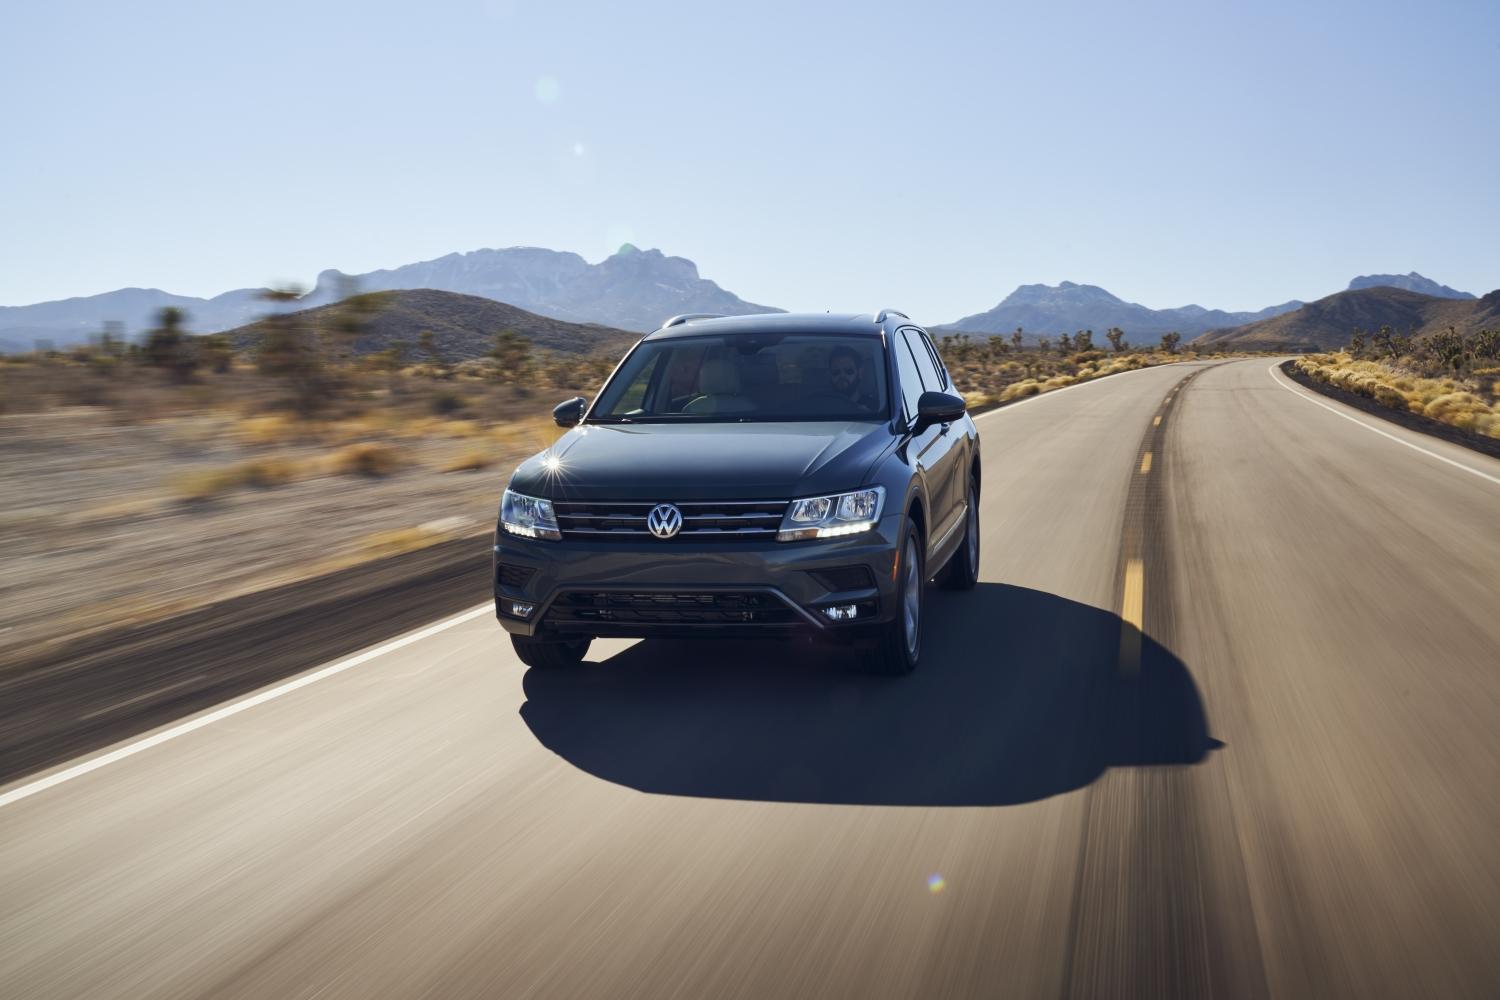 The 2021 Volkswagen Tiguan is one of the most budget-friendly three-row SUVs.